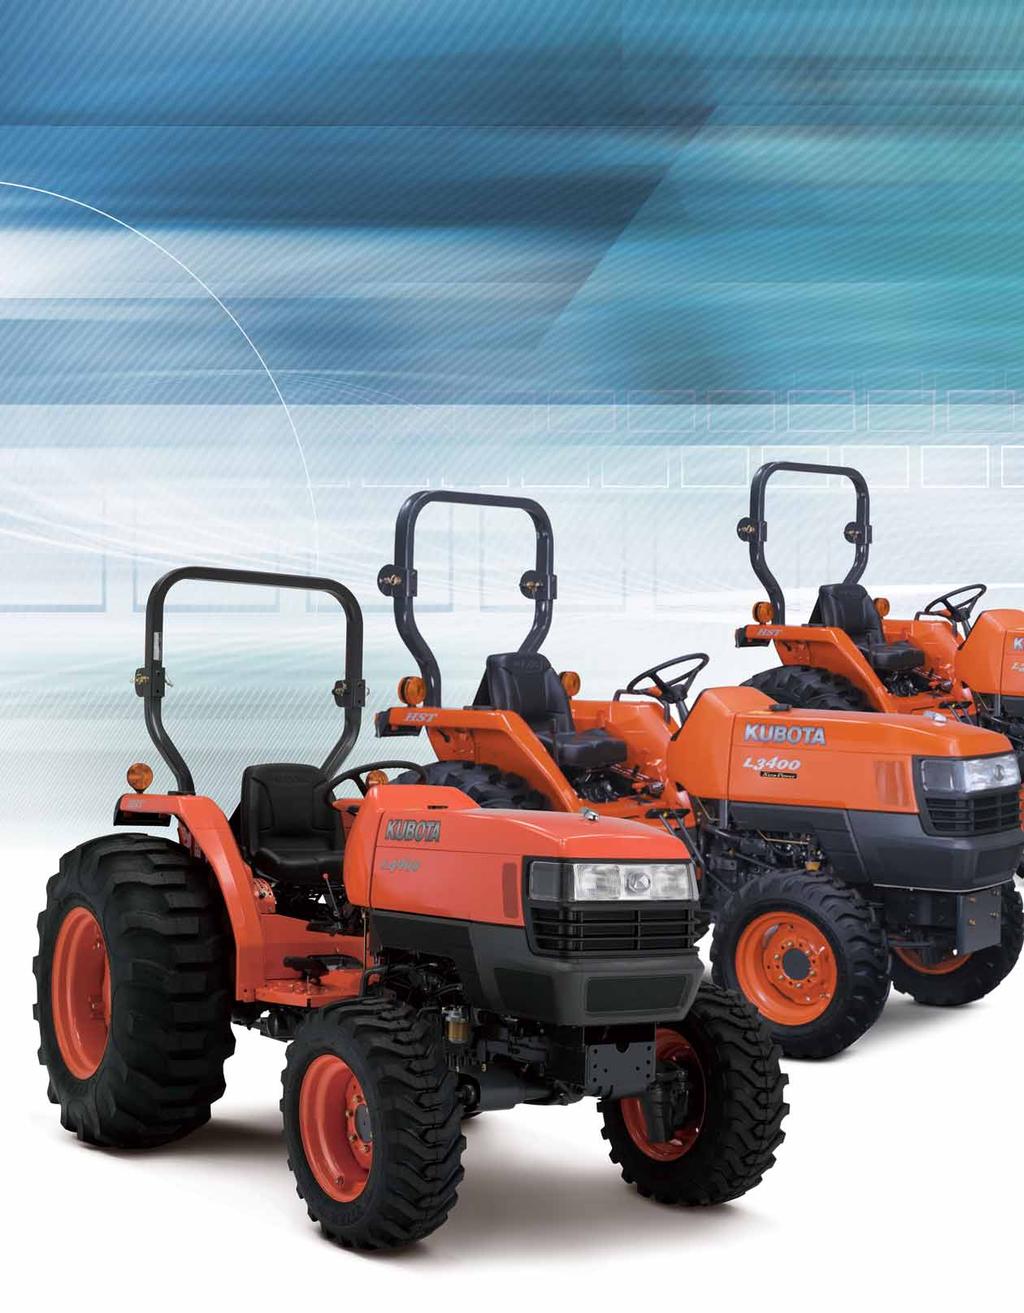 To do the job right, you need the right tract Kubota s standard L-Series lineup lets you HST MODEL NEW L4400 4WD PTO 36.